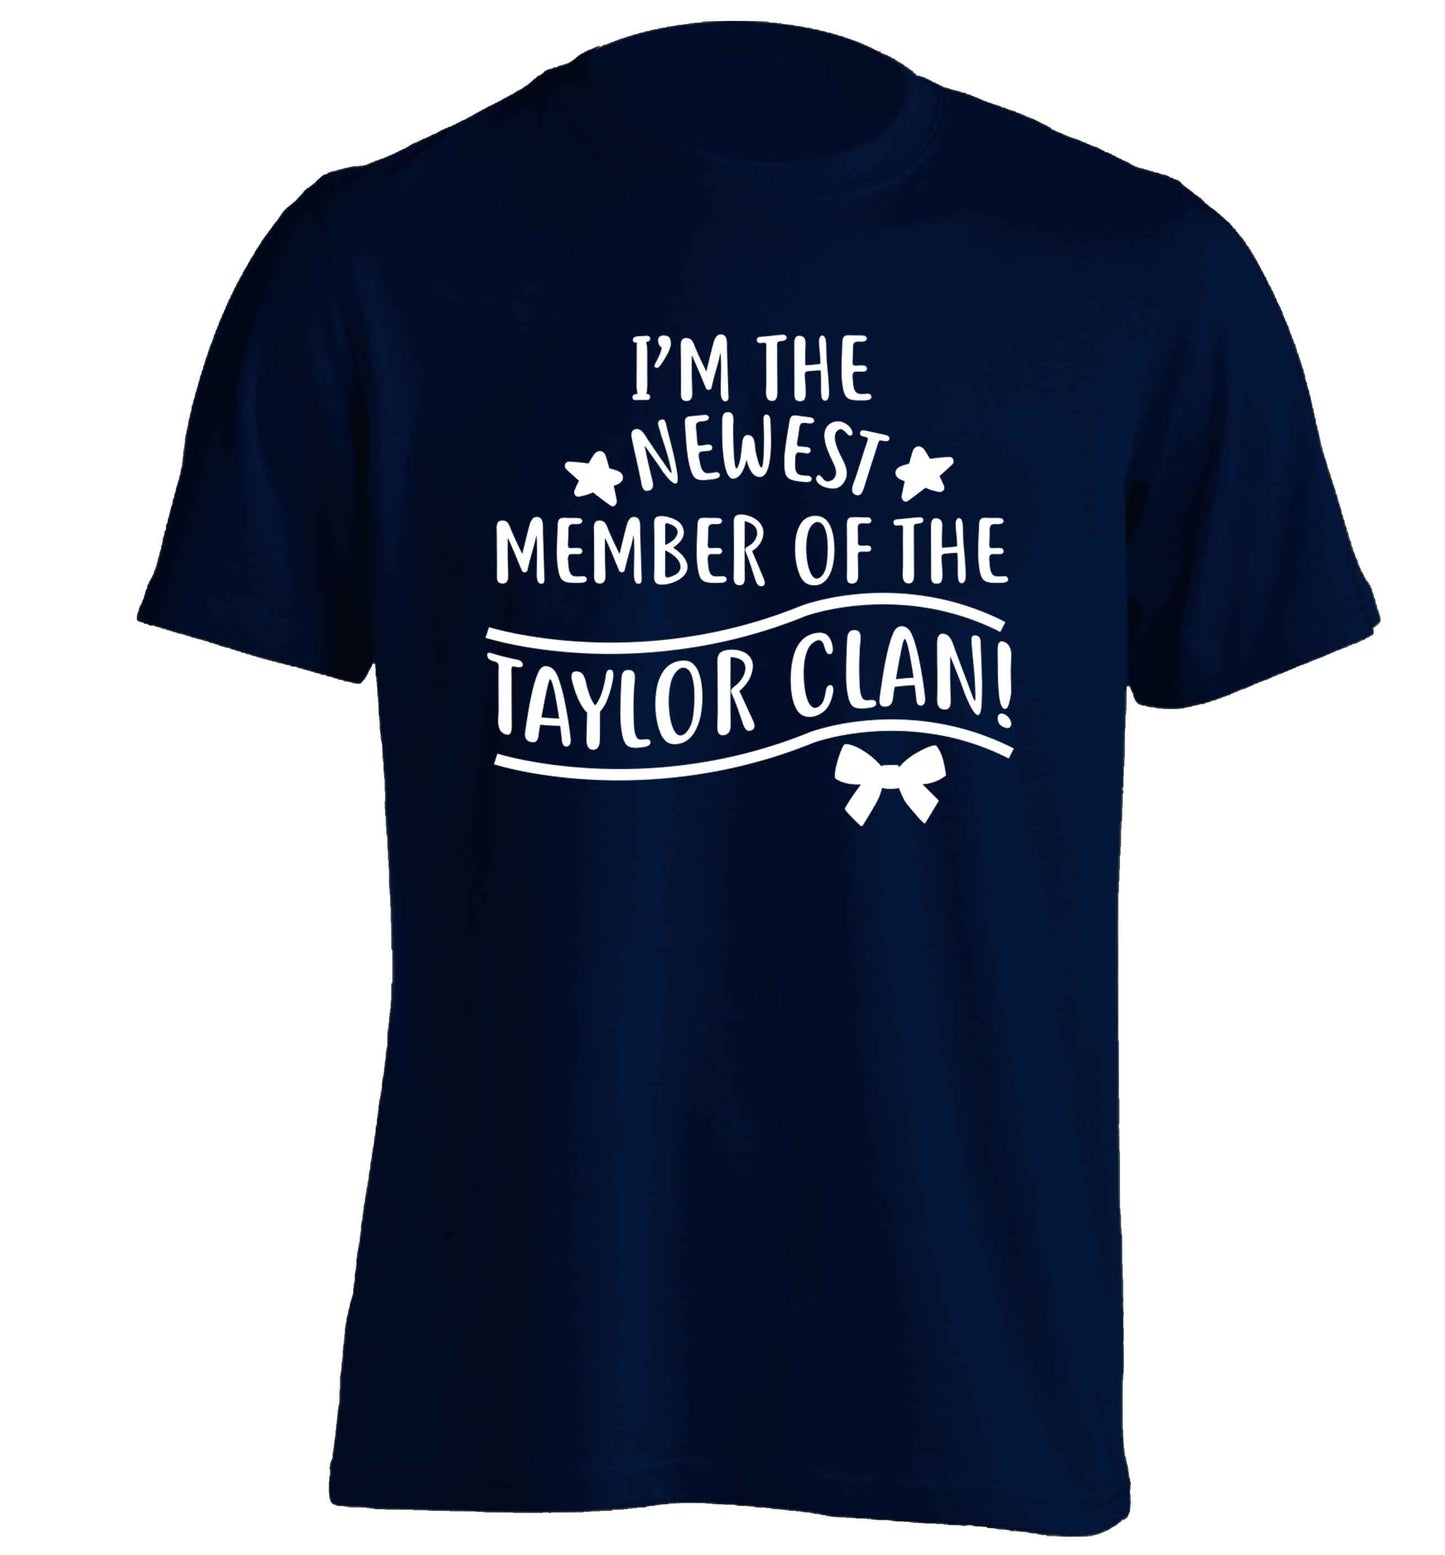 Personalised, newest member of the Taylor clan adults unisex navy Tshirt 2XL